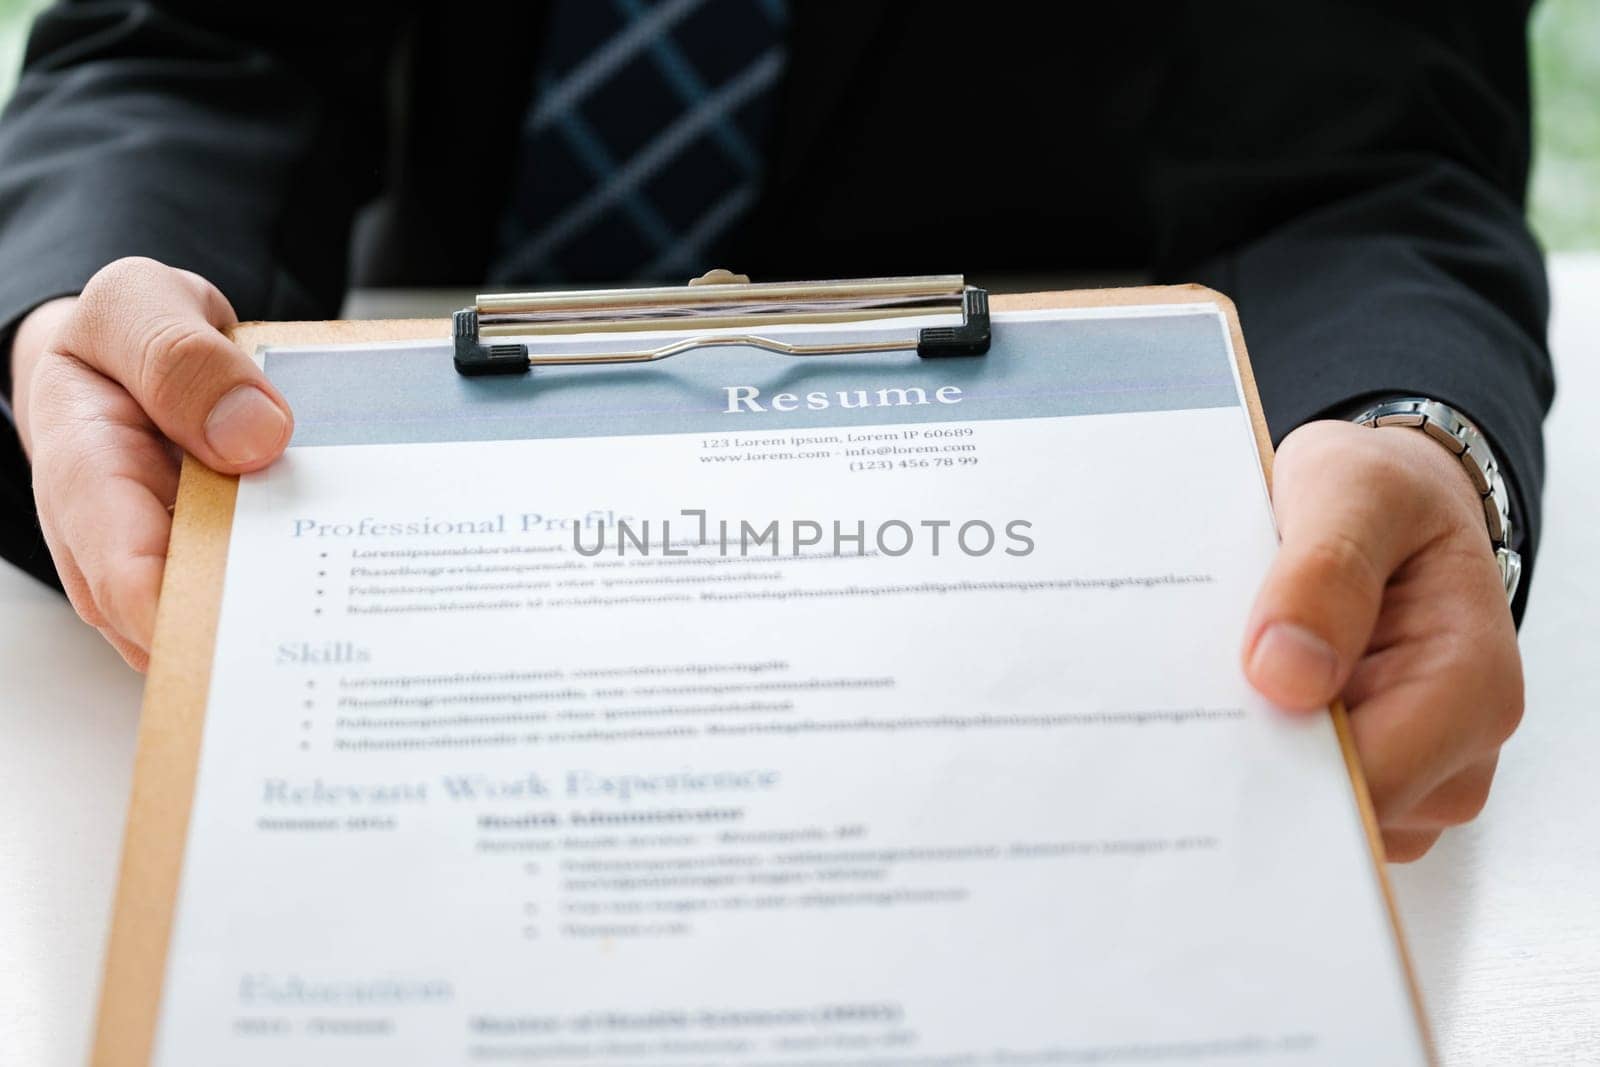 Close-up of a businessman's hands carefully examining a resume, focusing on qualifications for a job candidate.